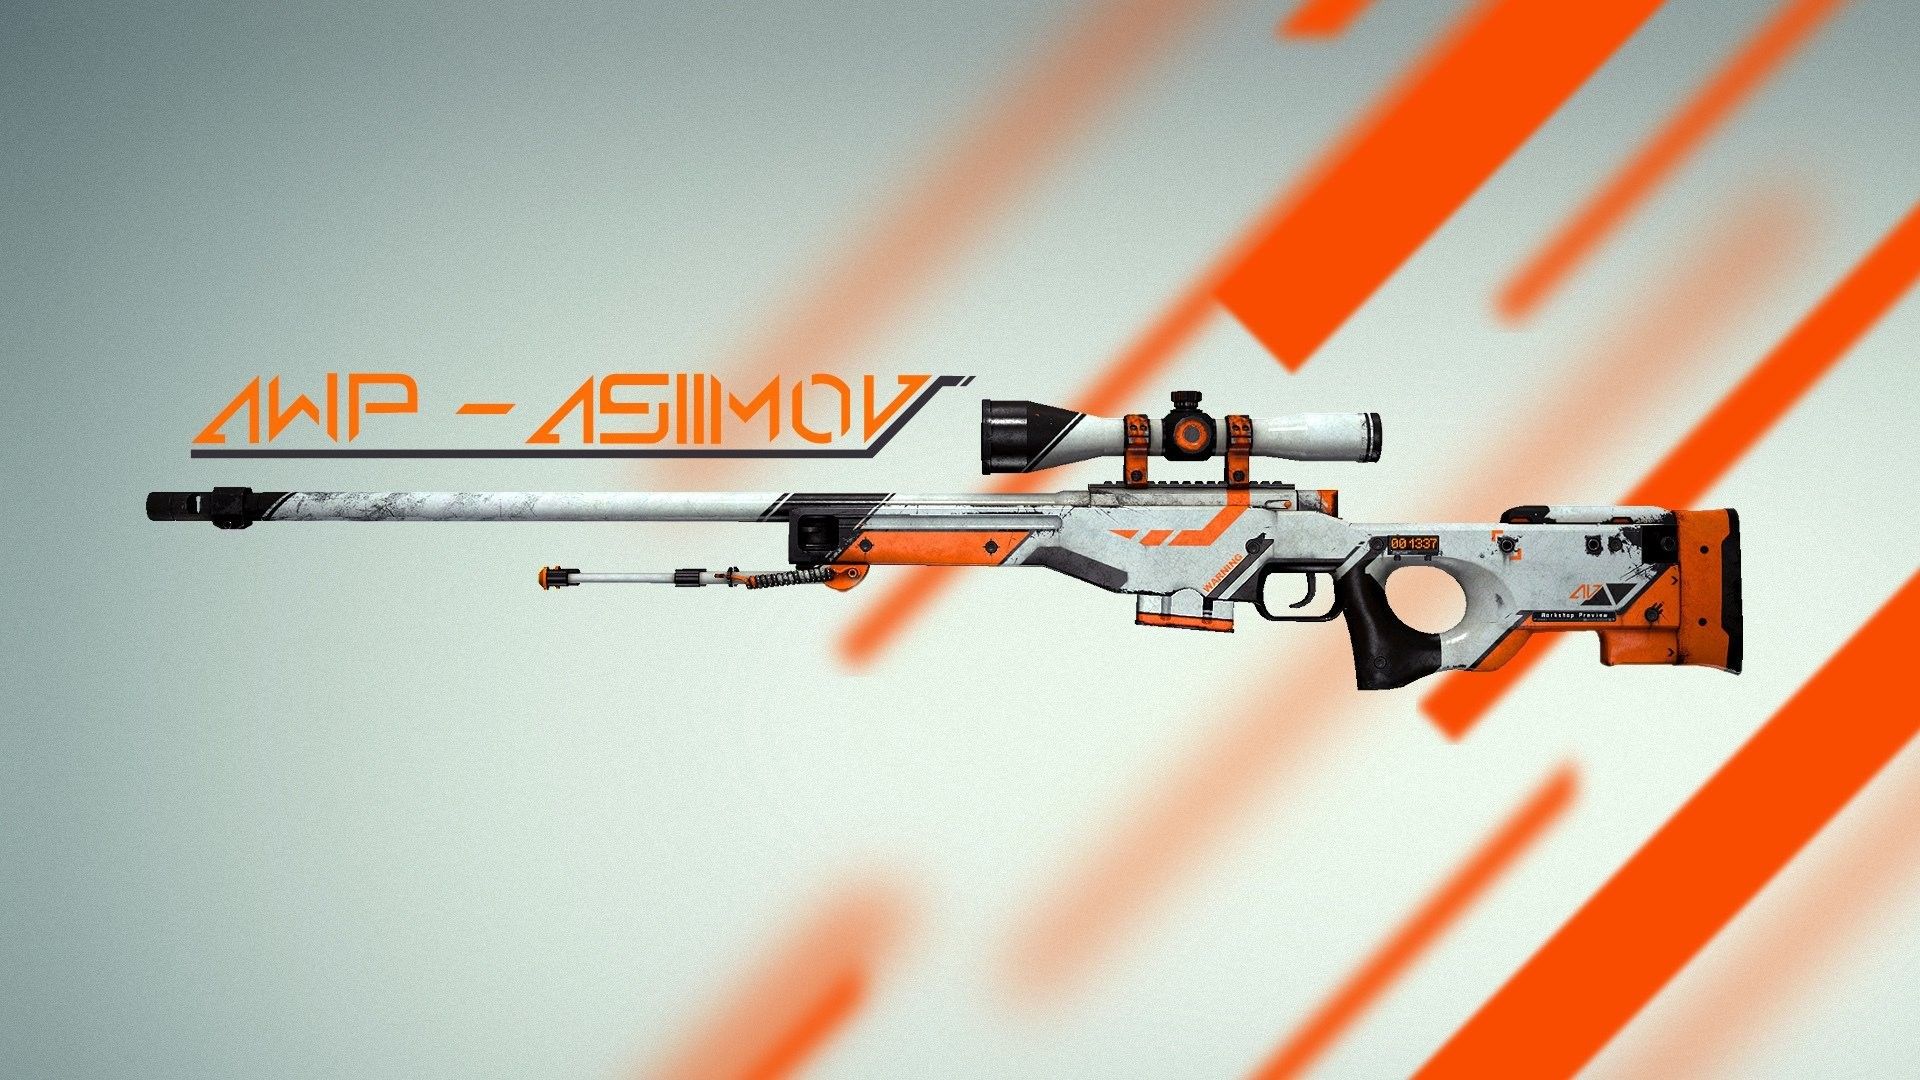 JPEG Thompson cs go skin download the new for android